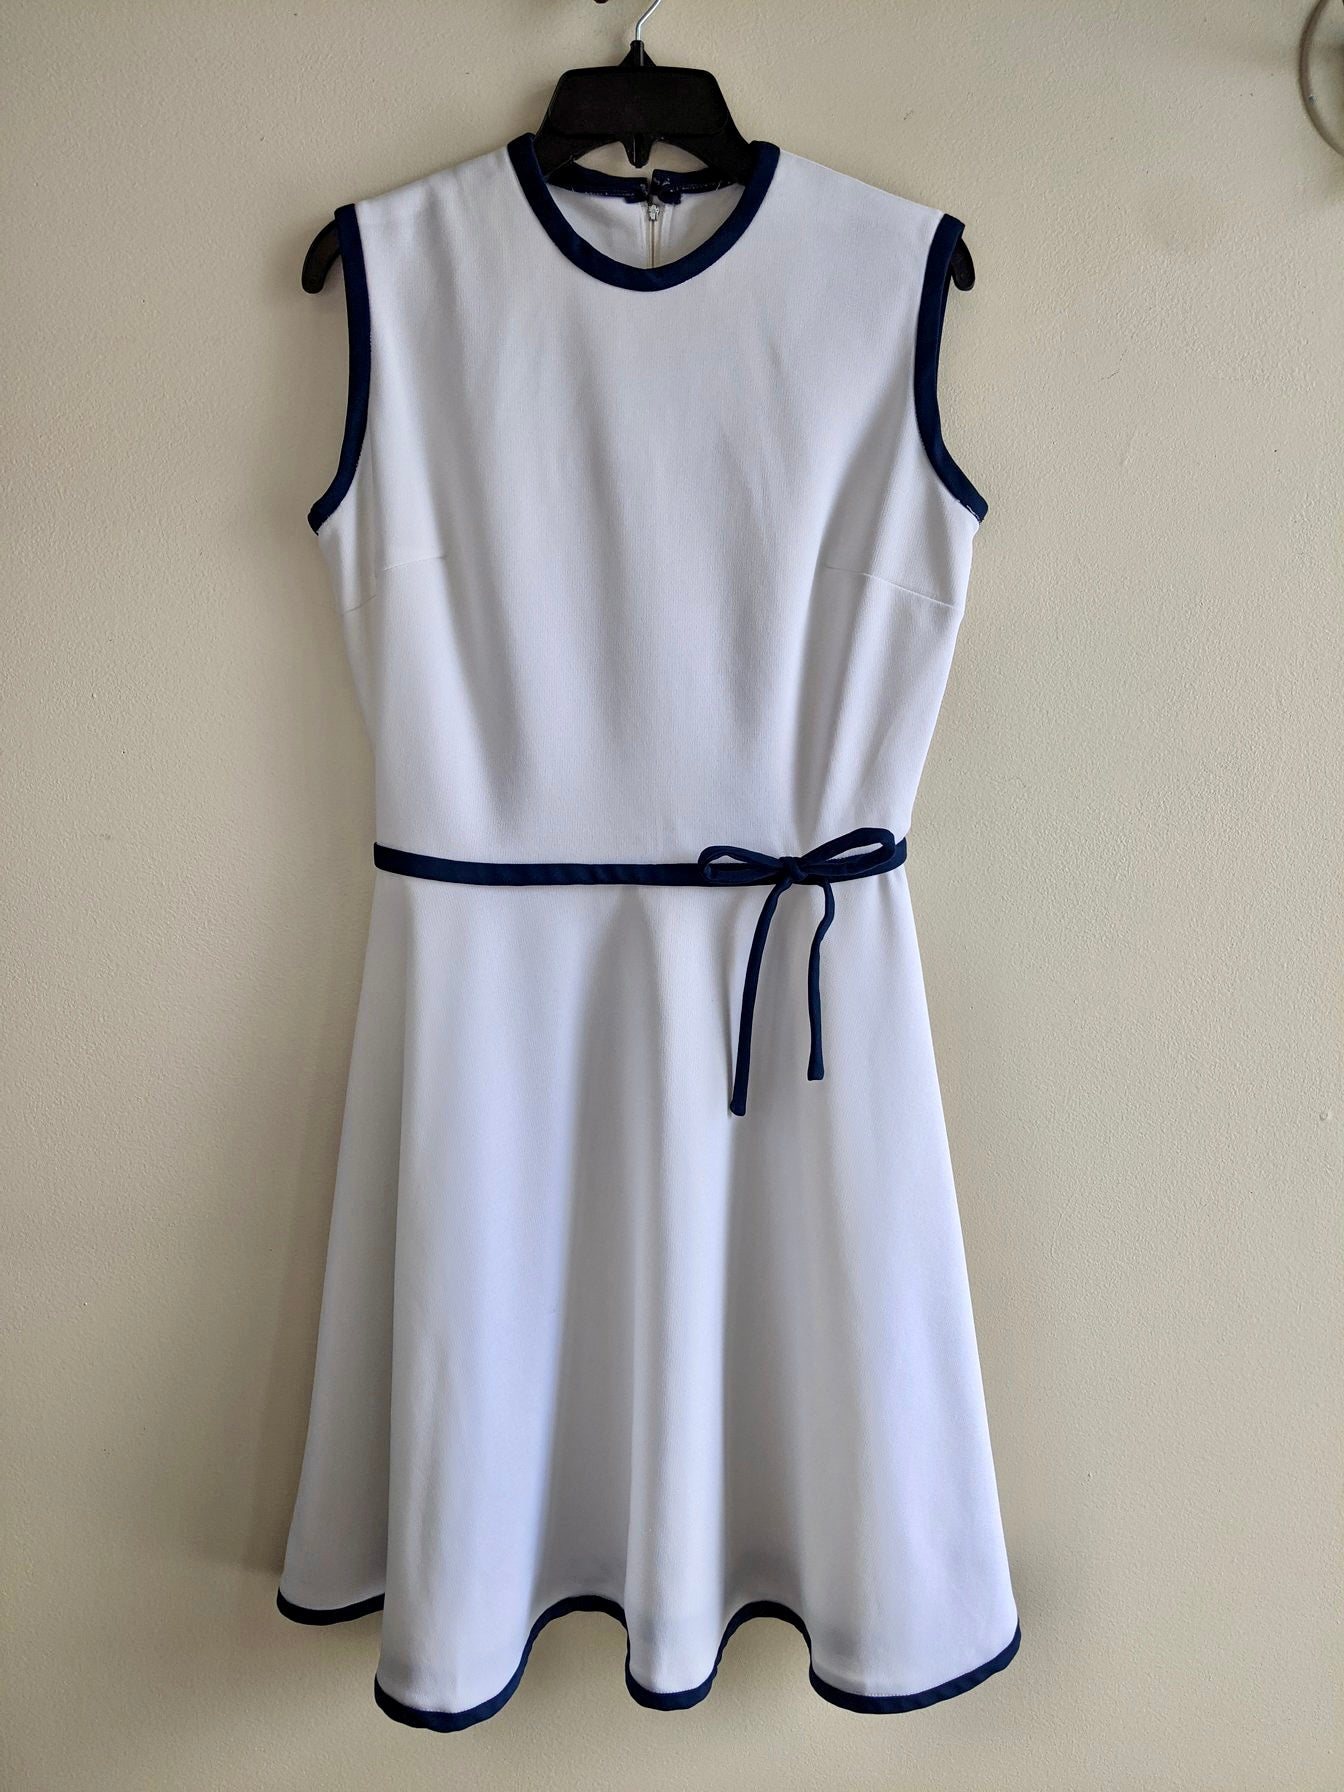 1970’s White Fit & Flare Dress